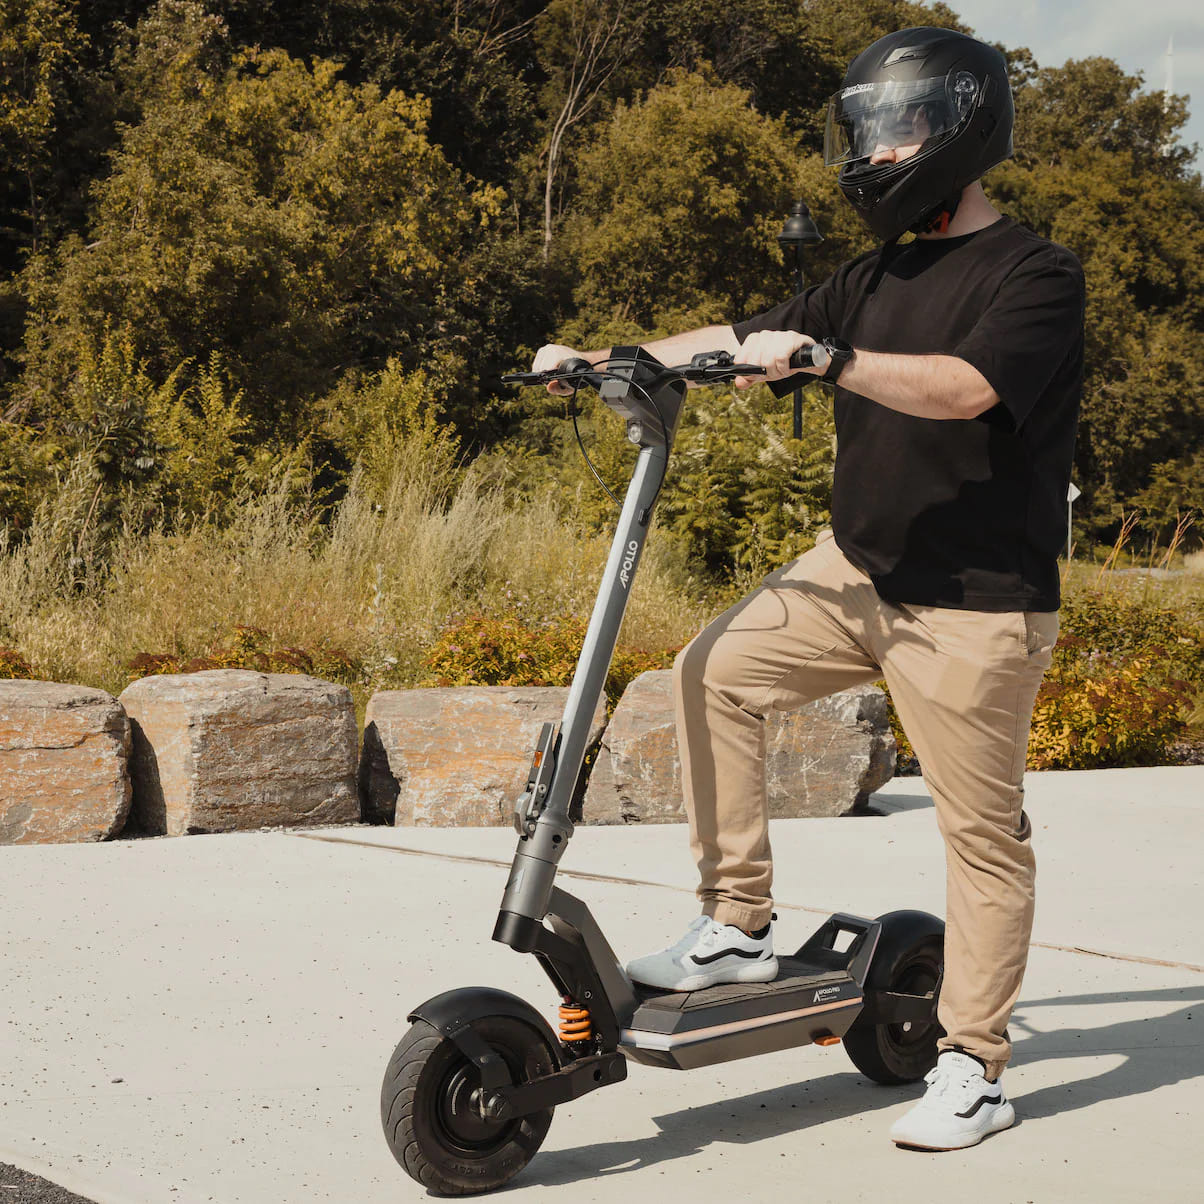 A Guide to Essential Scooter Safety Gear and Protective Clothing